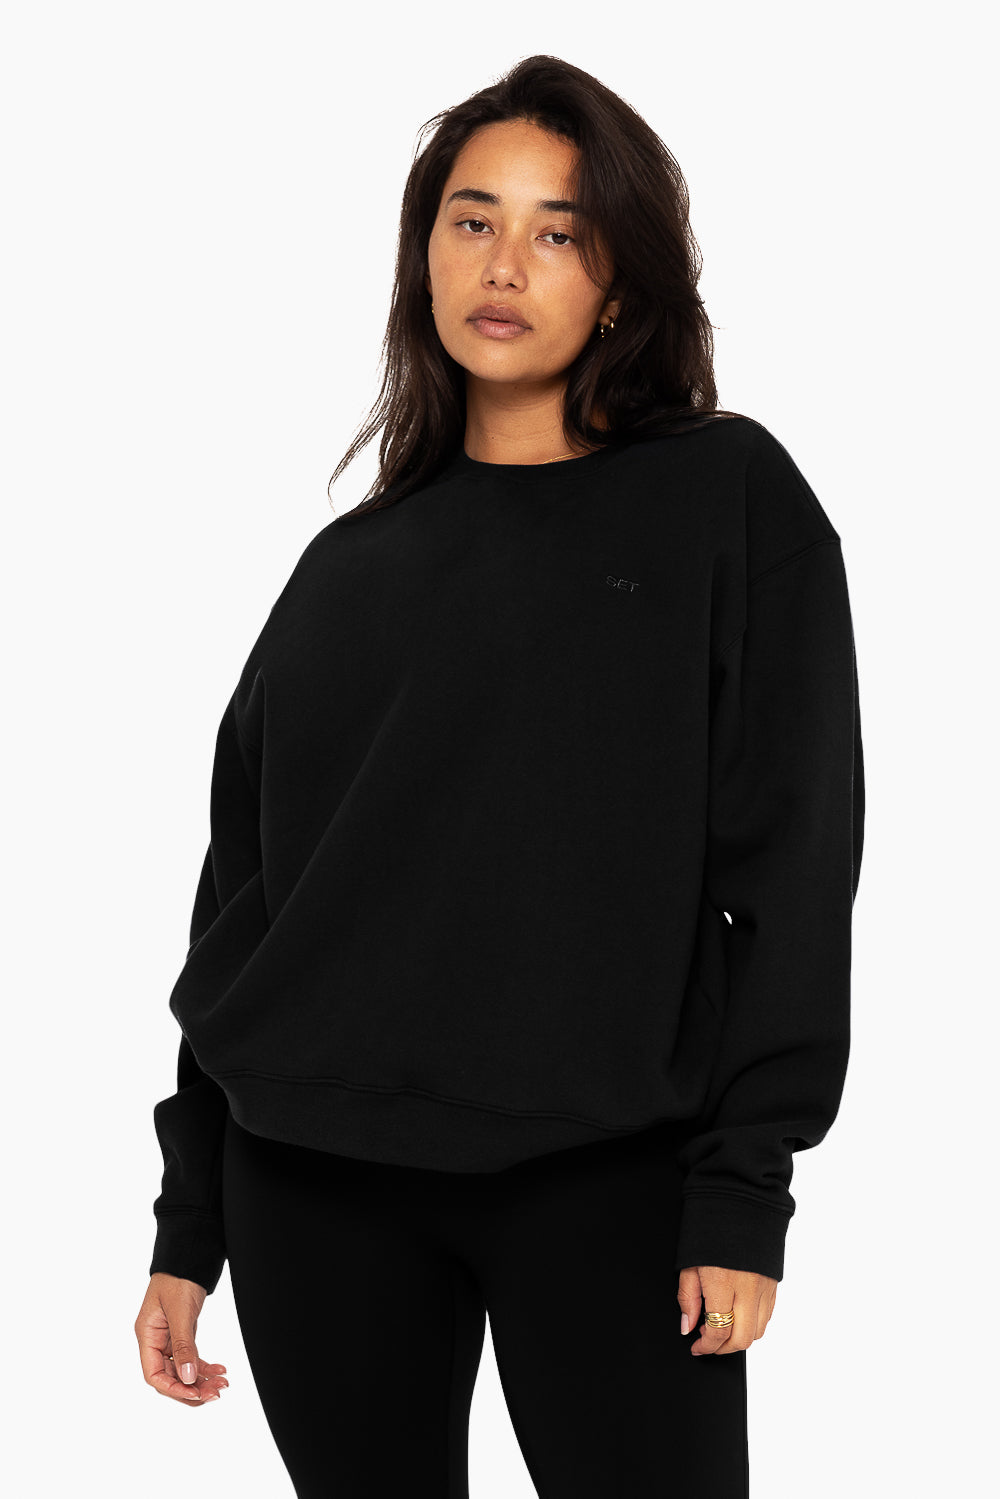 SET™ EMBROIDERED HEAVYWEIGHT SWEATS CREWNECK IN ONYX